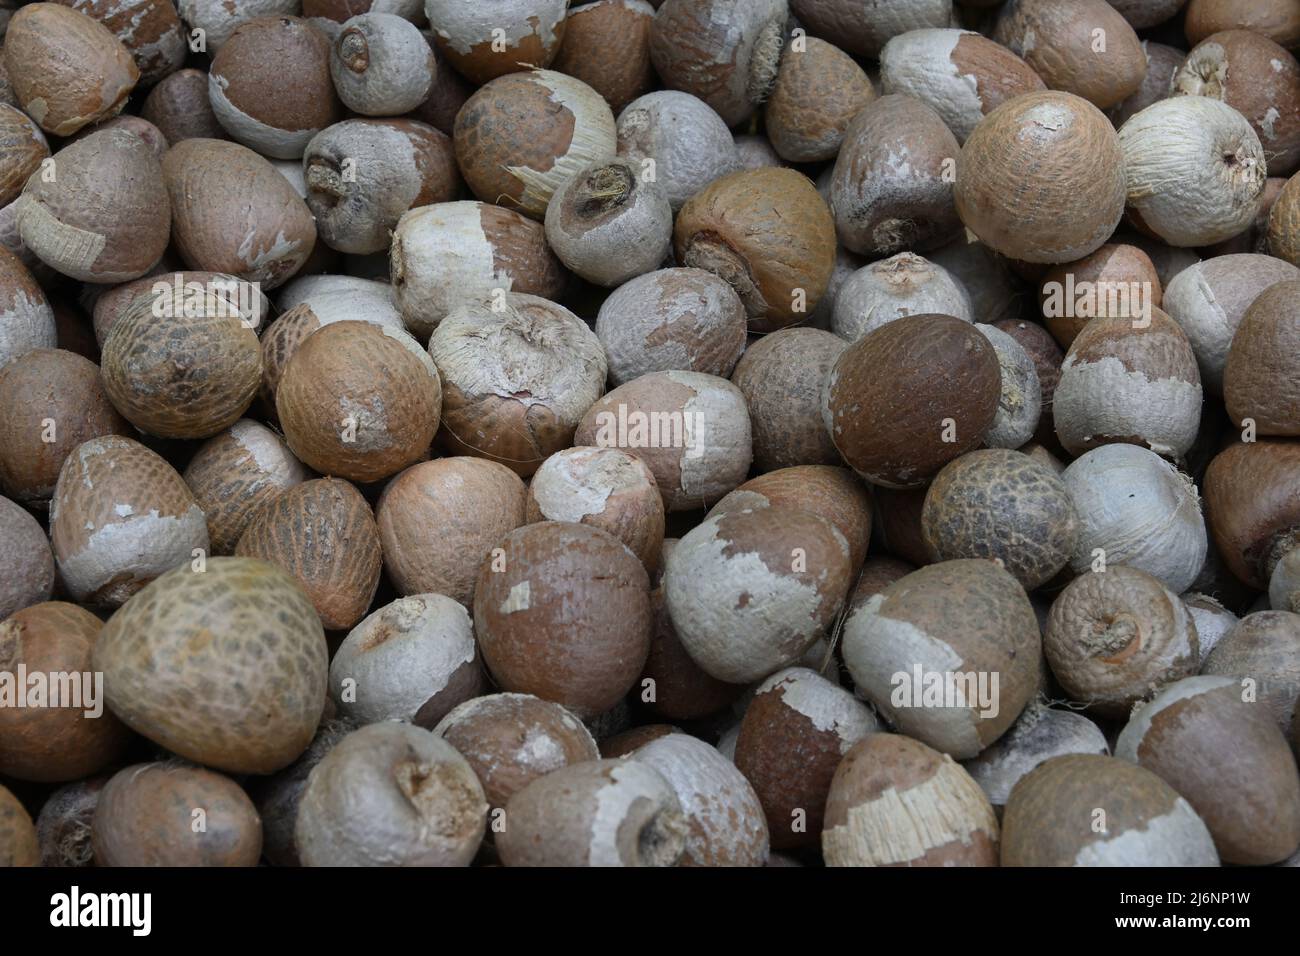 Side view of husk removed Areca nuts or betel nuts (Areca catechu) Stock Photo